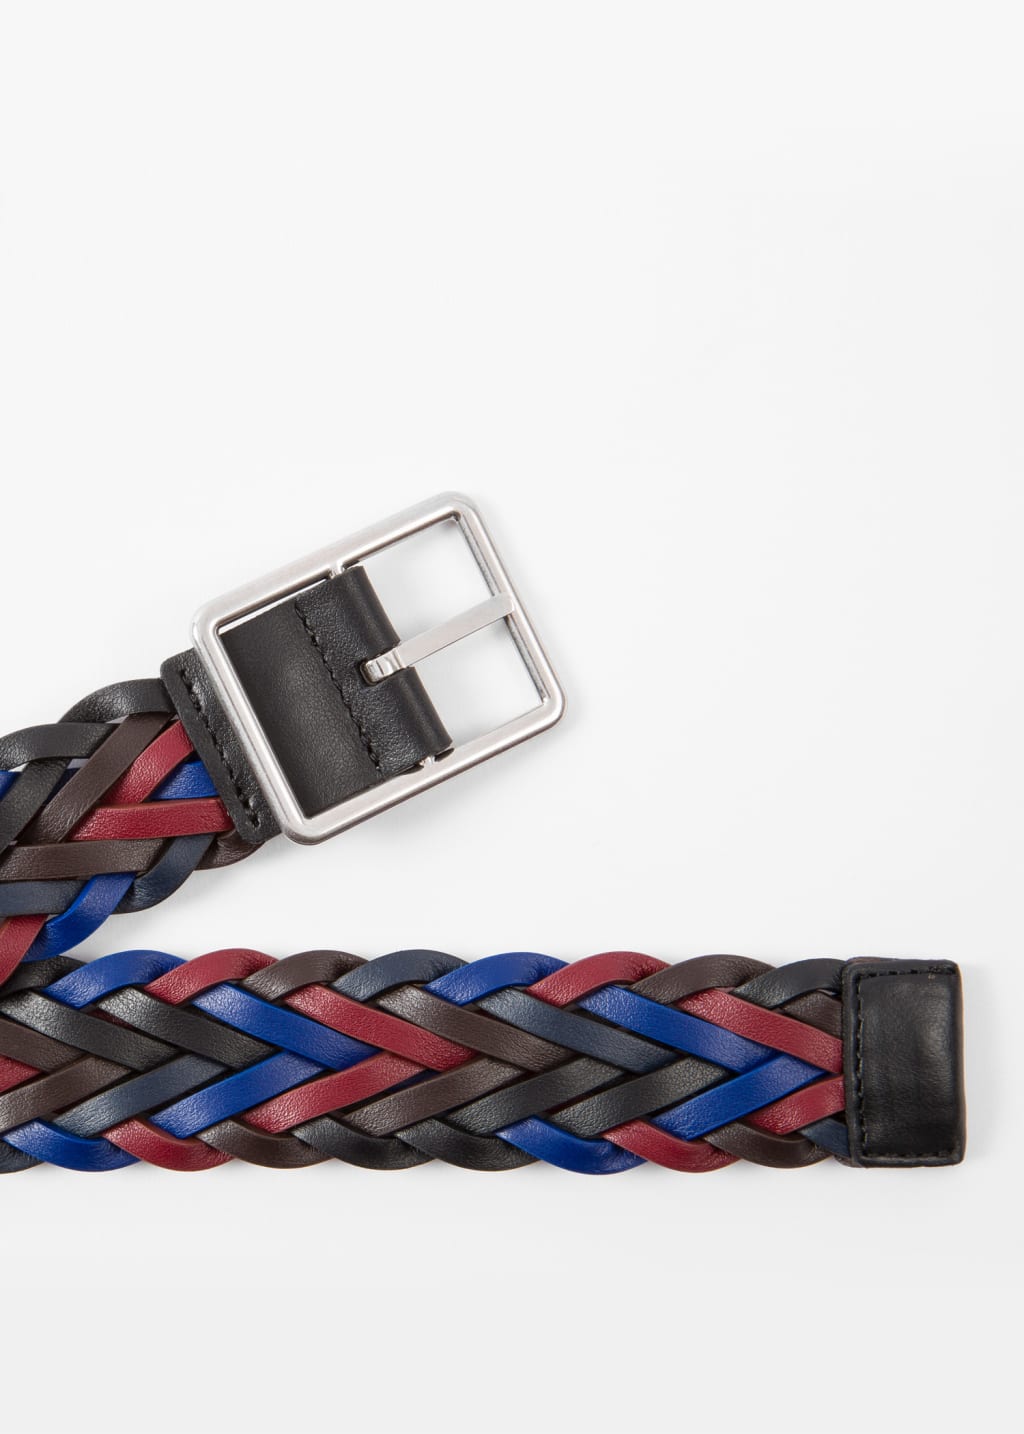 Detail View - Reversible Plaited Leather Belt Paul Smith